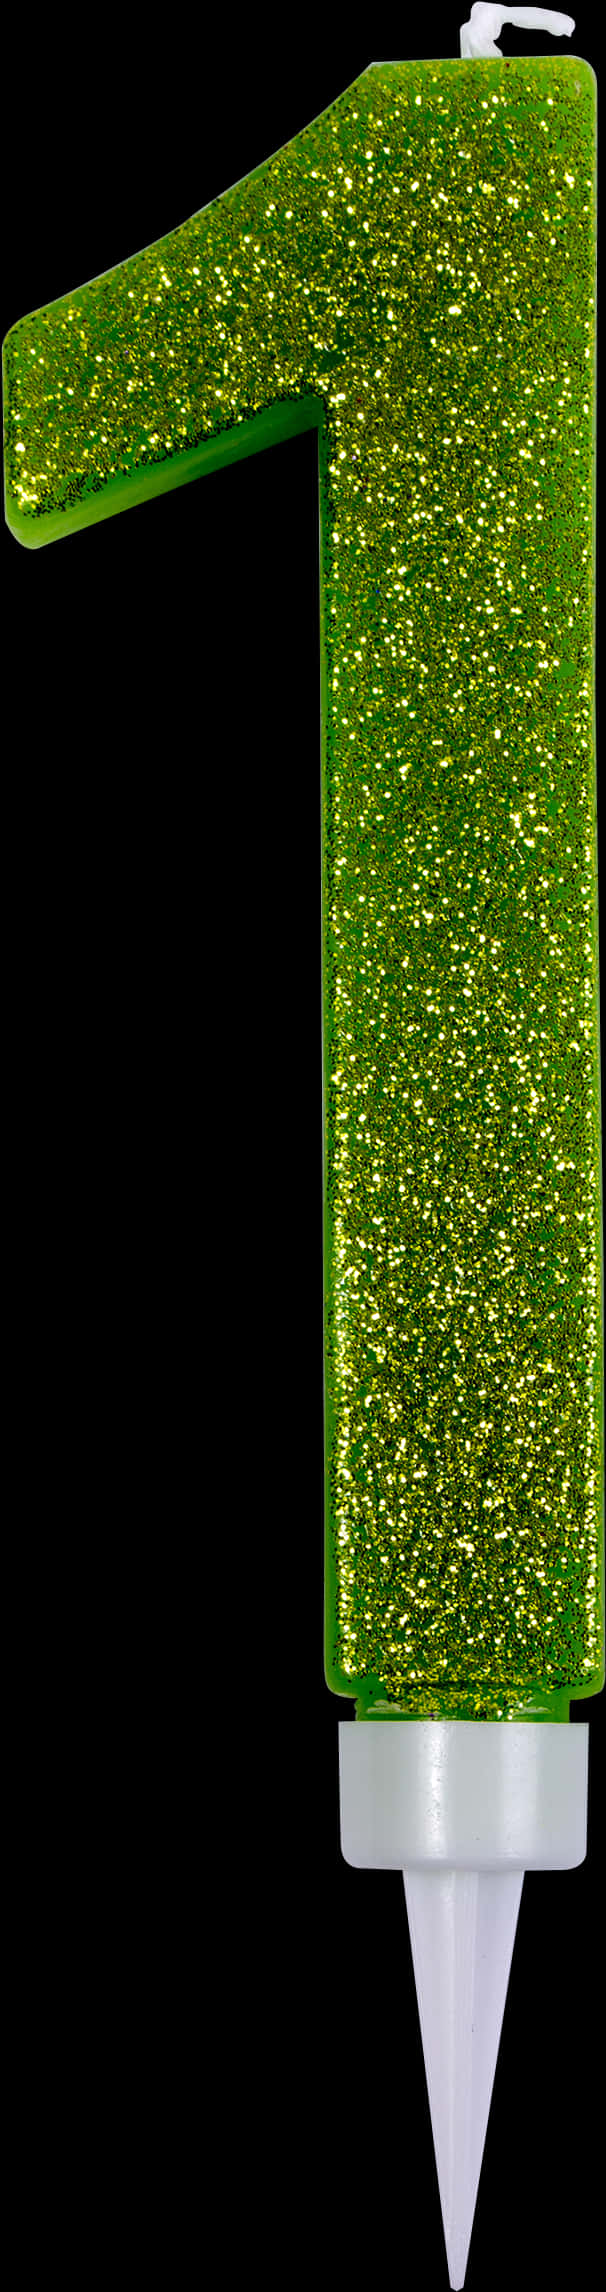 A Green Glitter Strip With Black Background